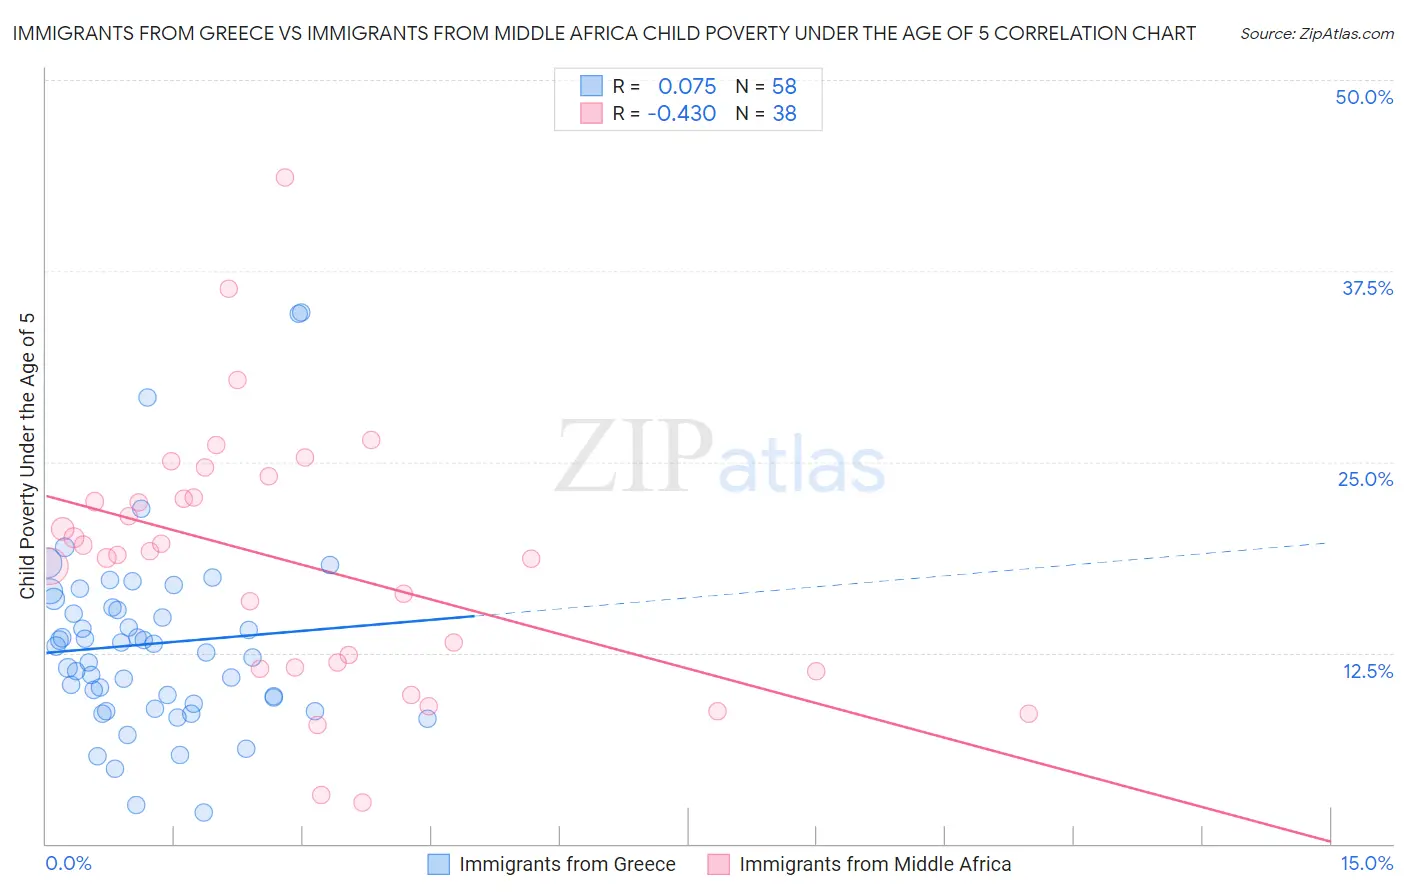 Immigrants from Greece vs Immigrants from Middle Africa Child Poverty Under the Age of 5